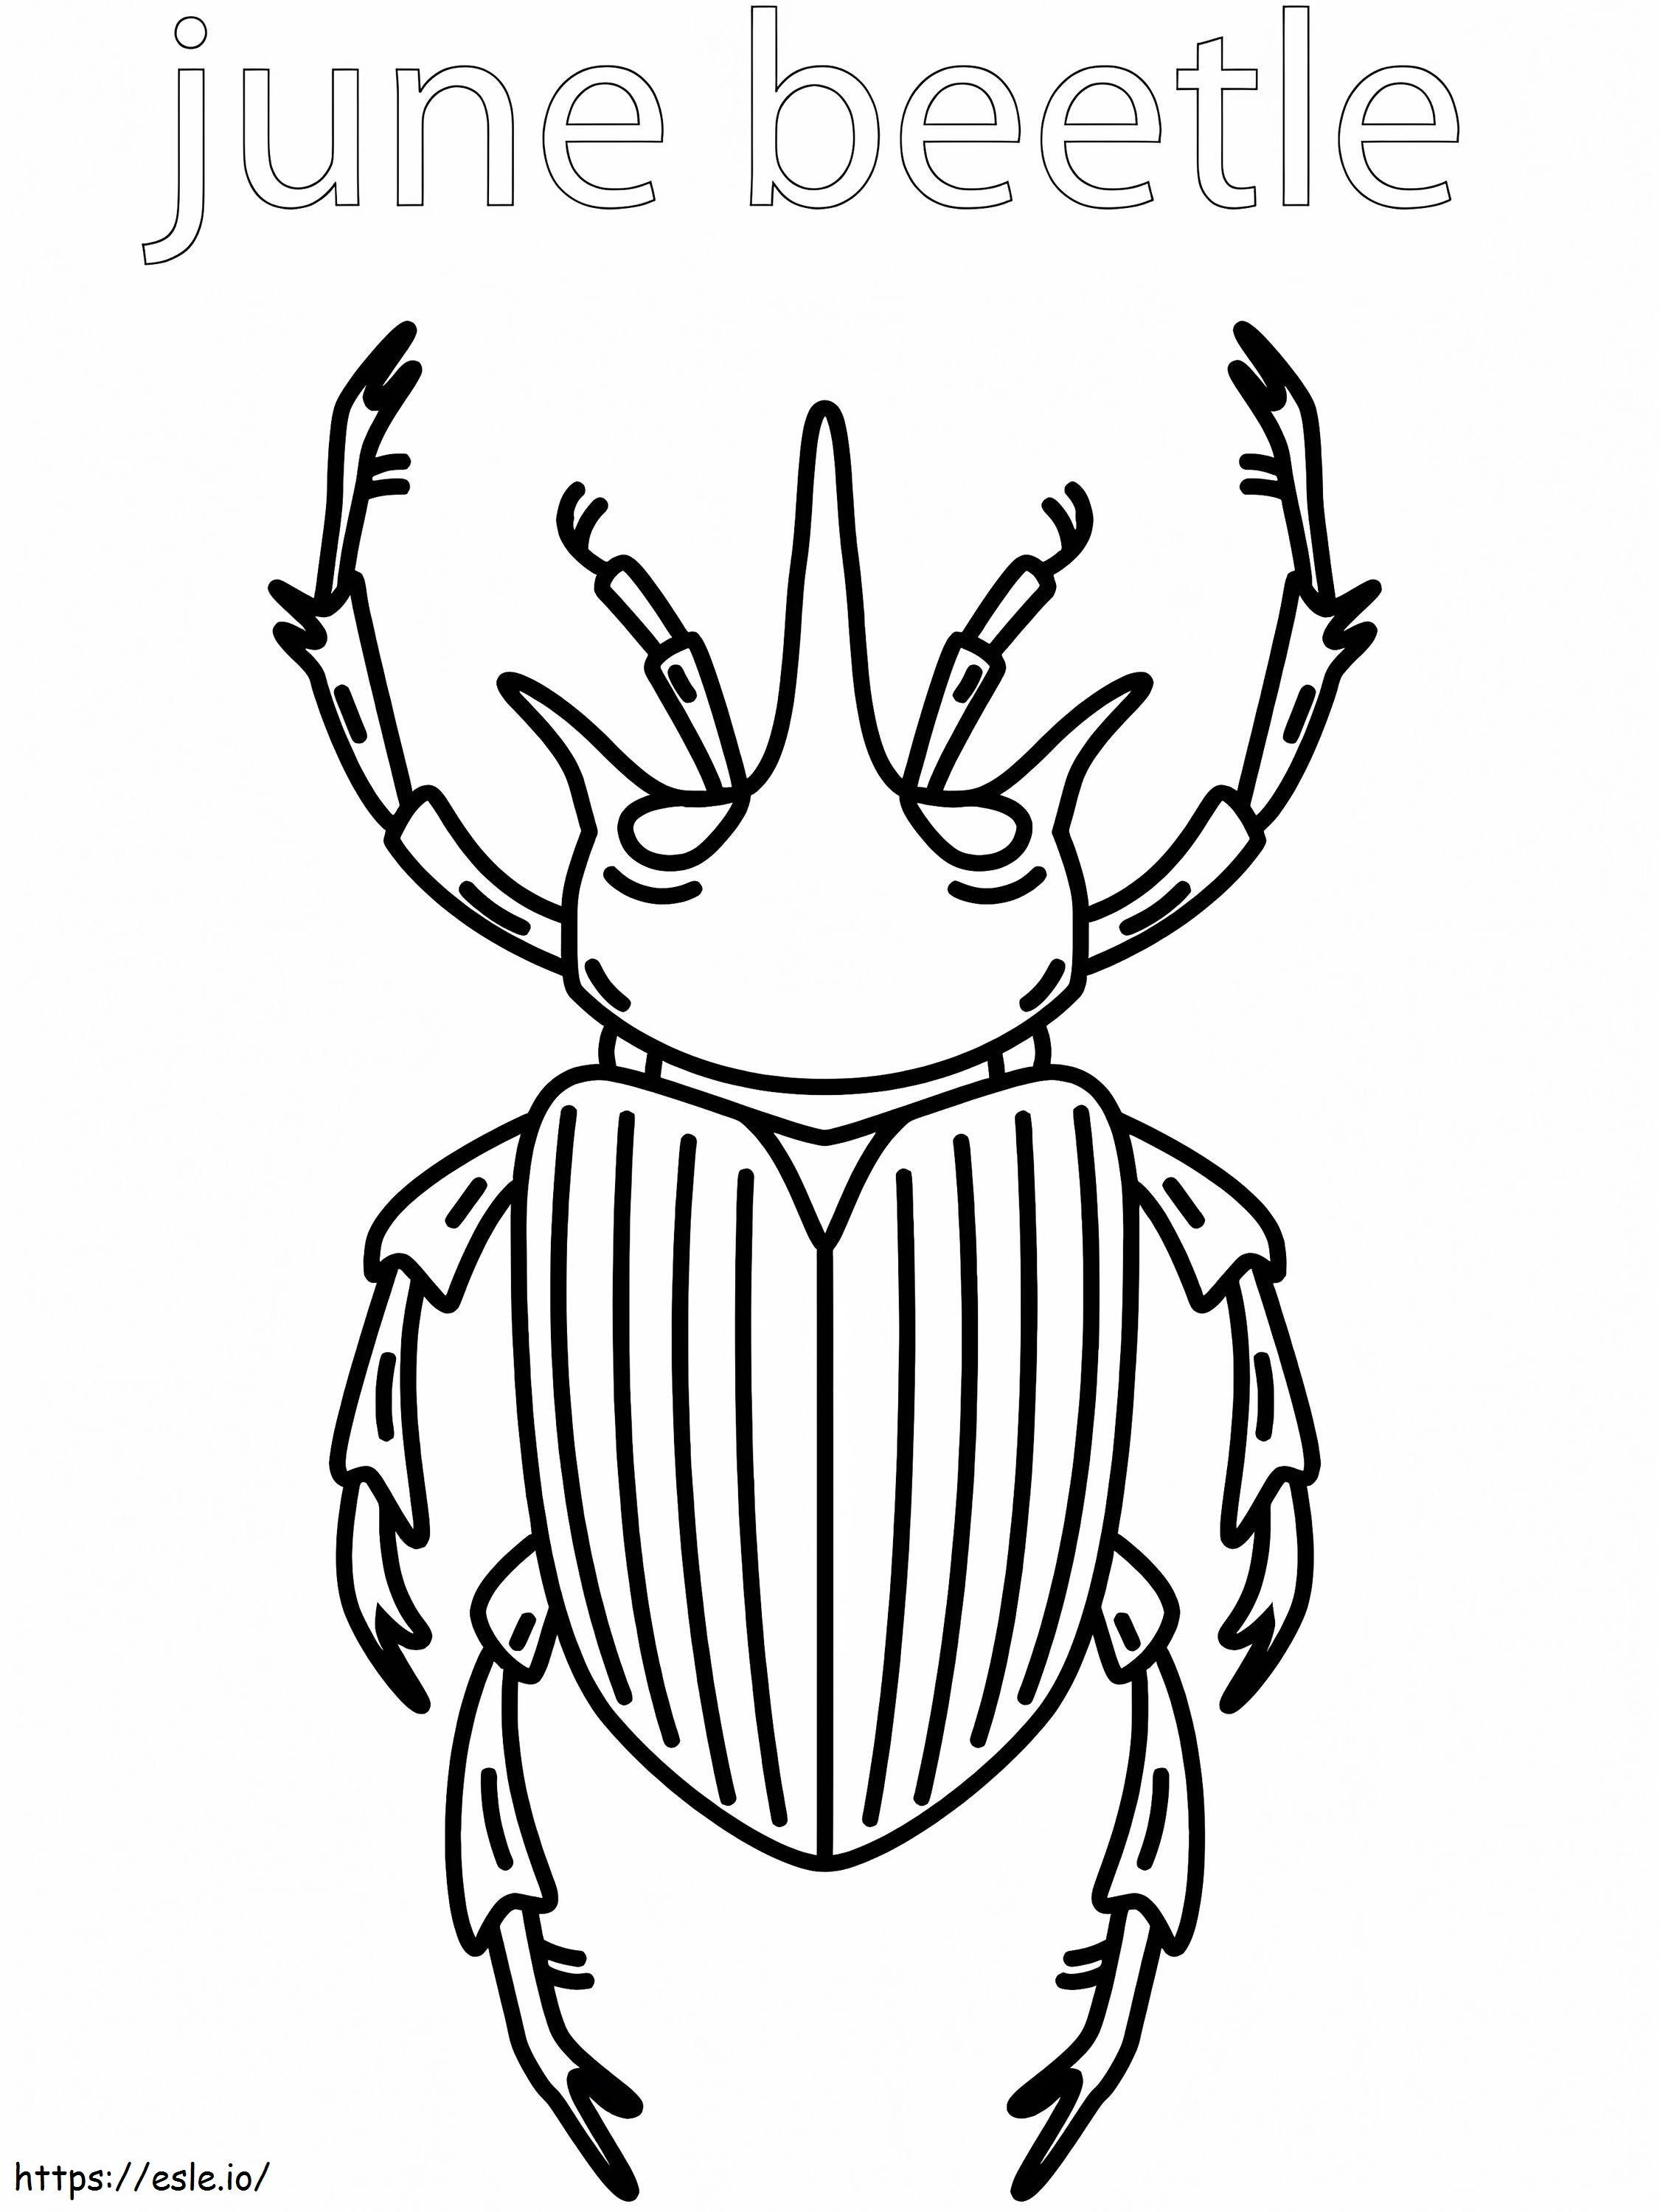 June Beetle coloring page